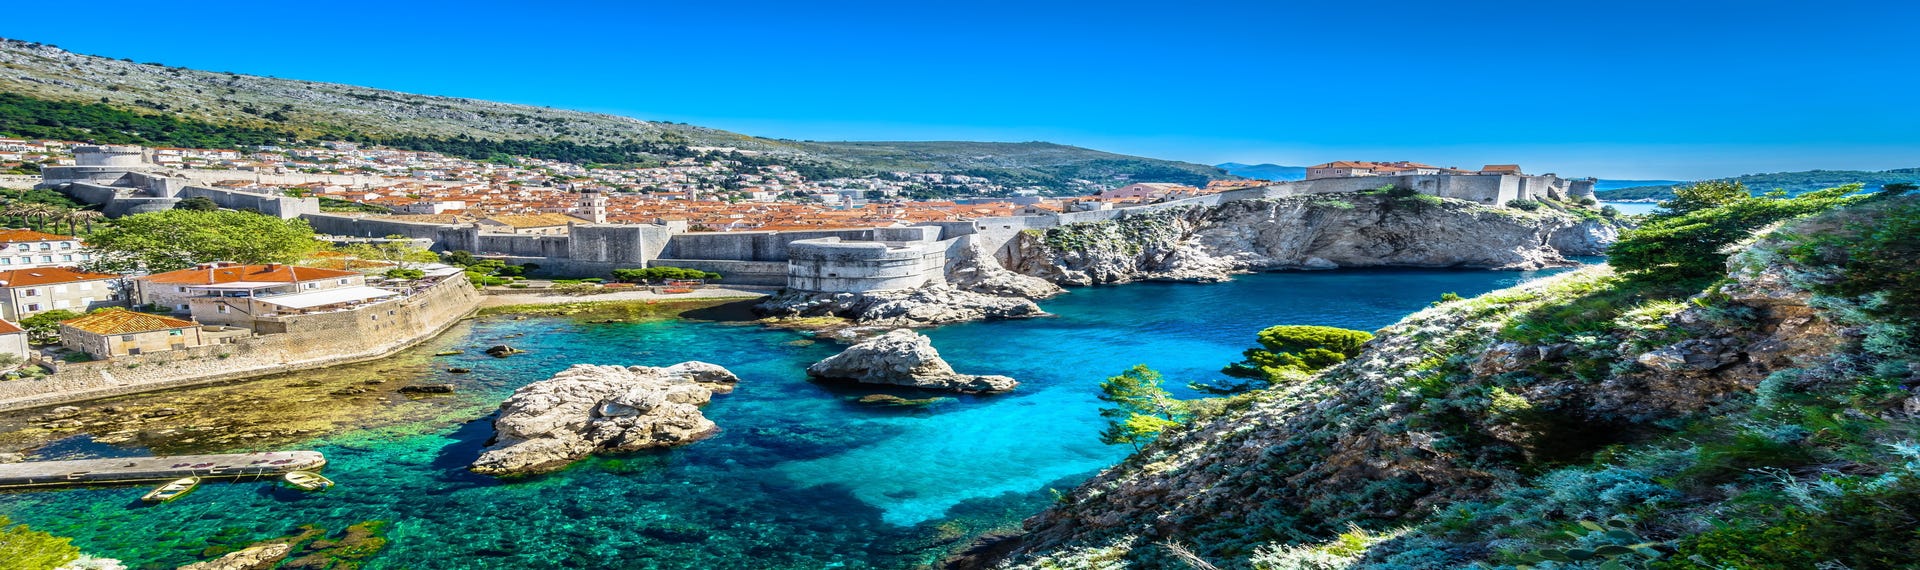 A panoramic view of the city of Dubrovnik